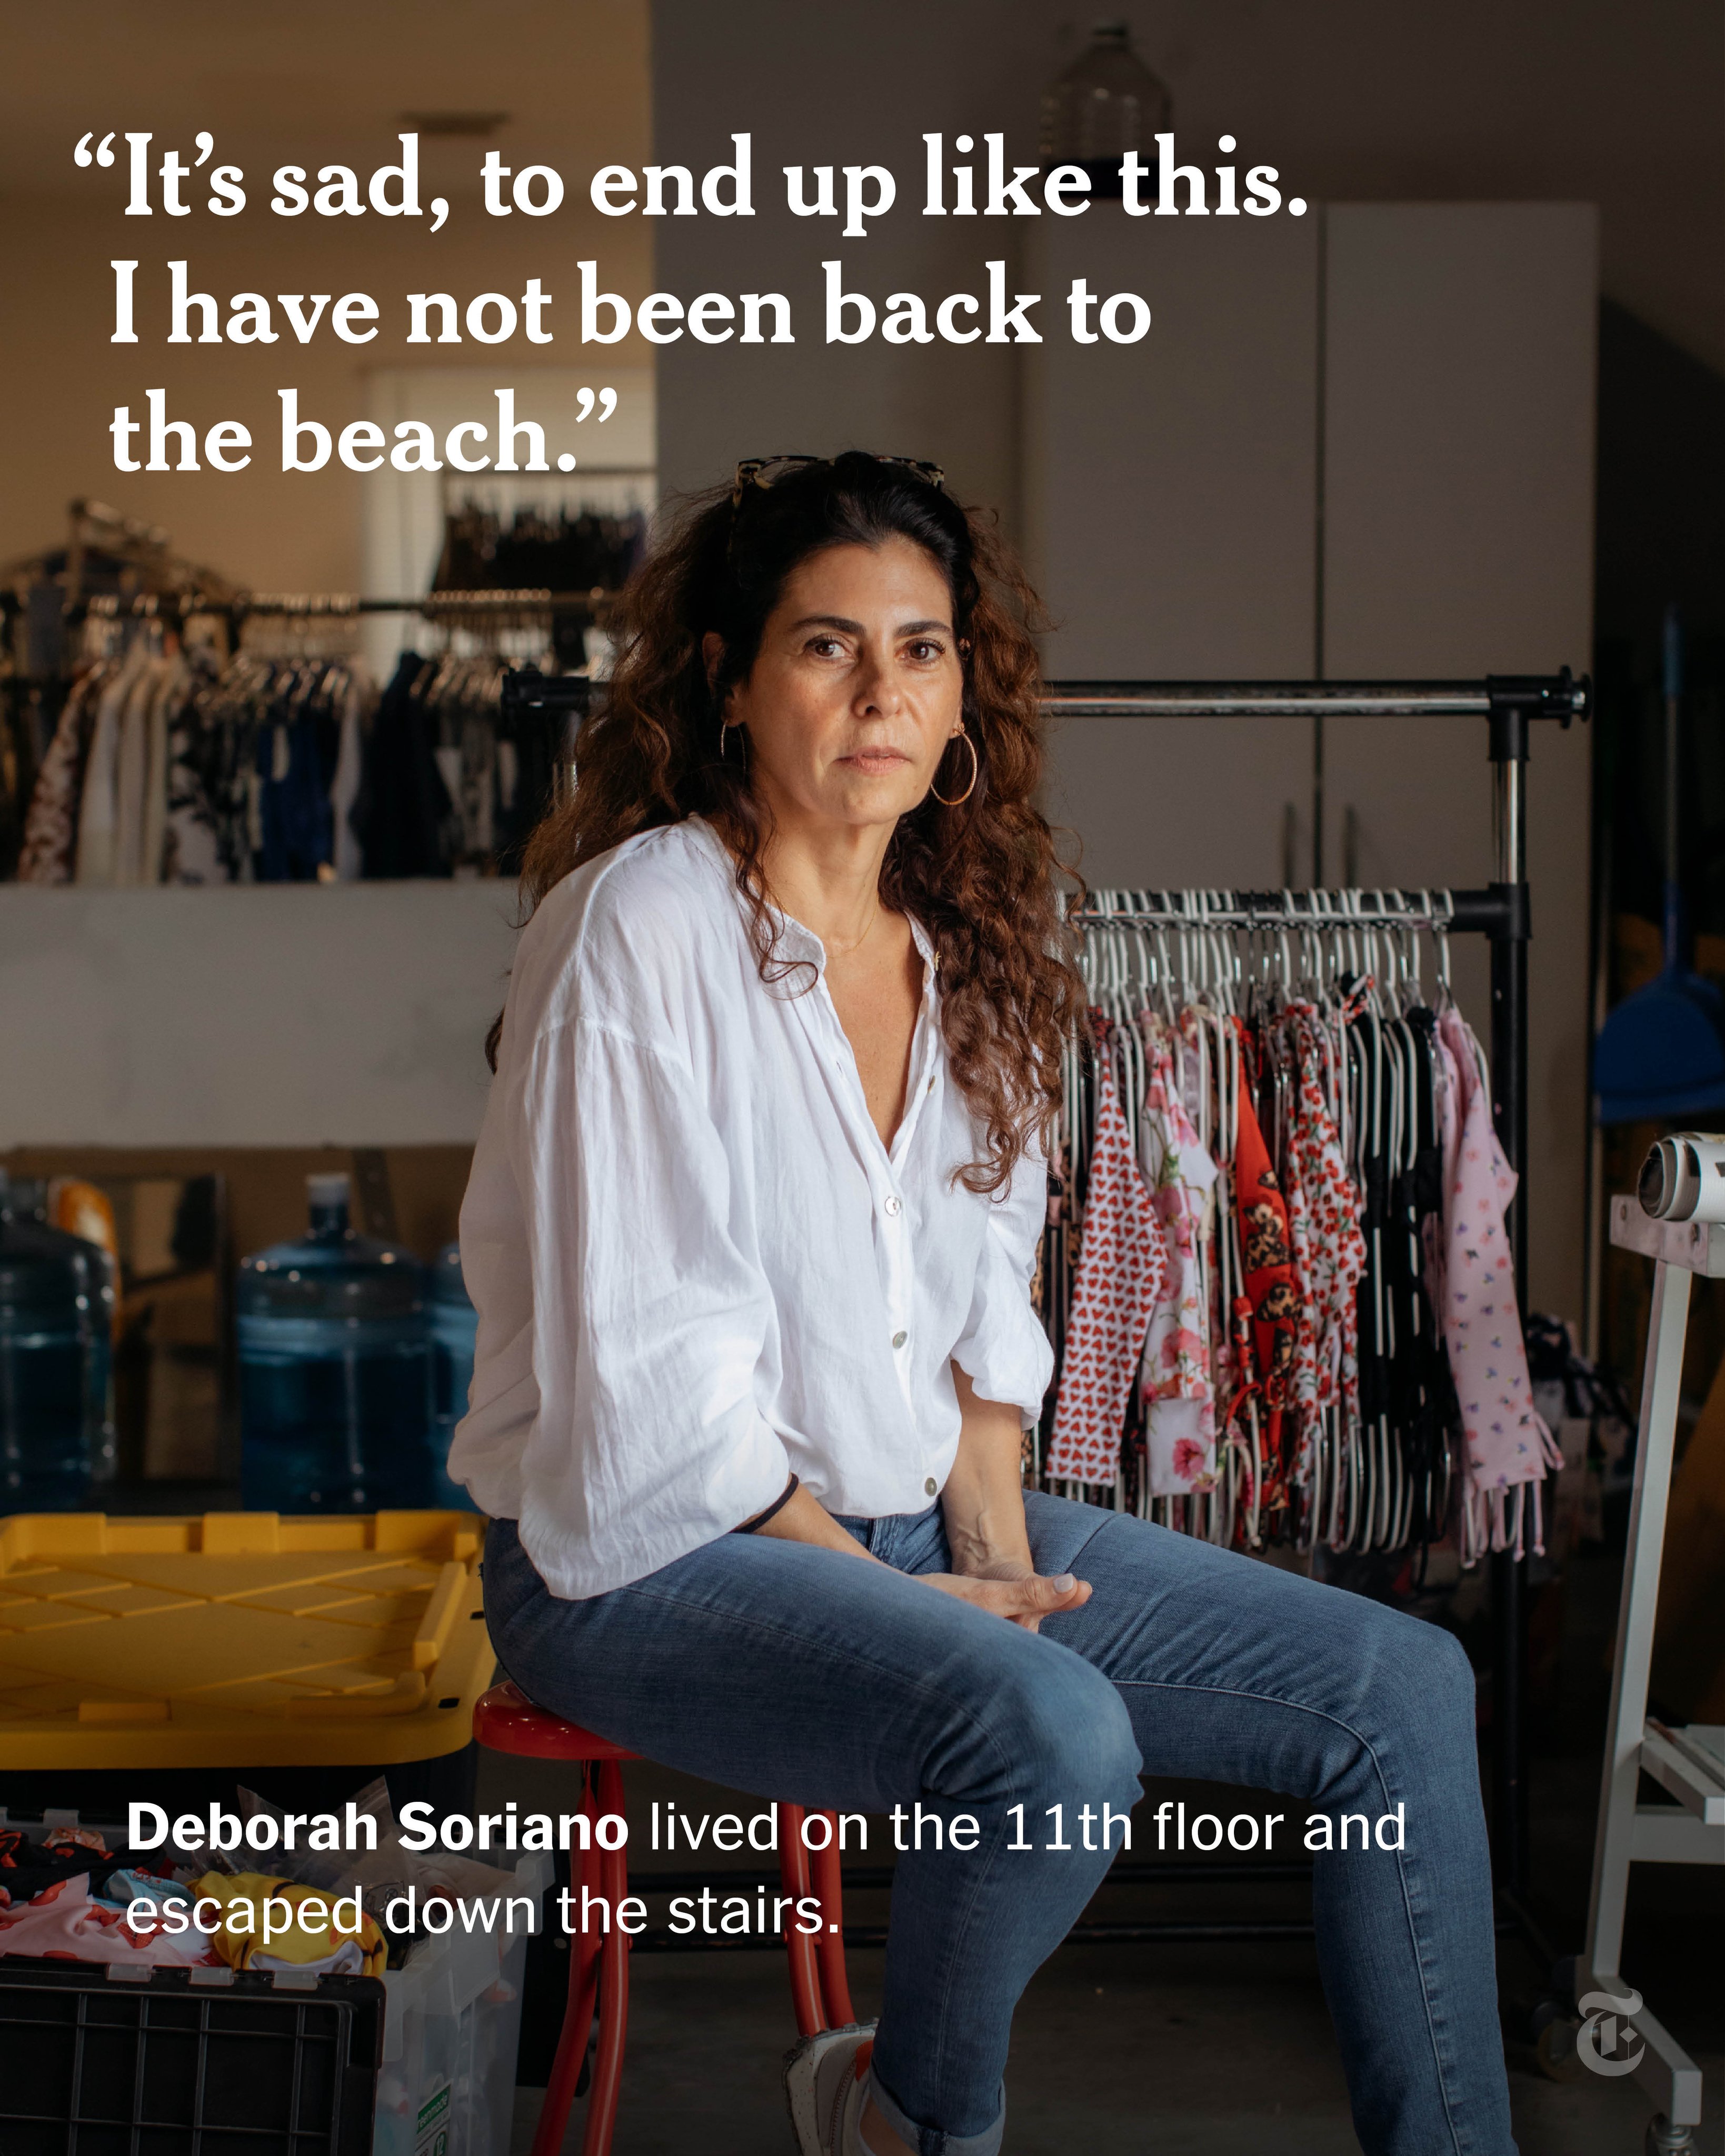 A portrait of Deborah Soriano, sitting down in a room. Her quote reads, "It's sad, to end up like this. I have not been back to the beach." Text reads, "Deborah Soriano lived on the 11th floor and escaped down the stairs."